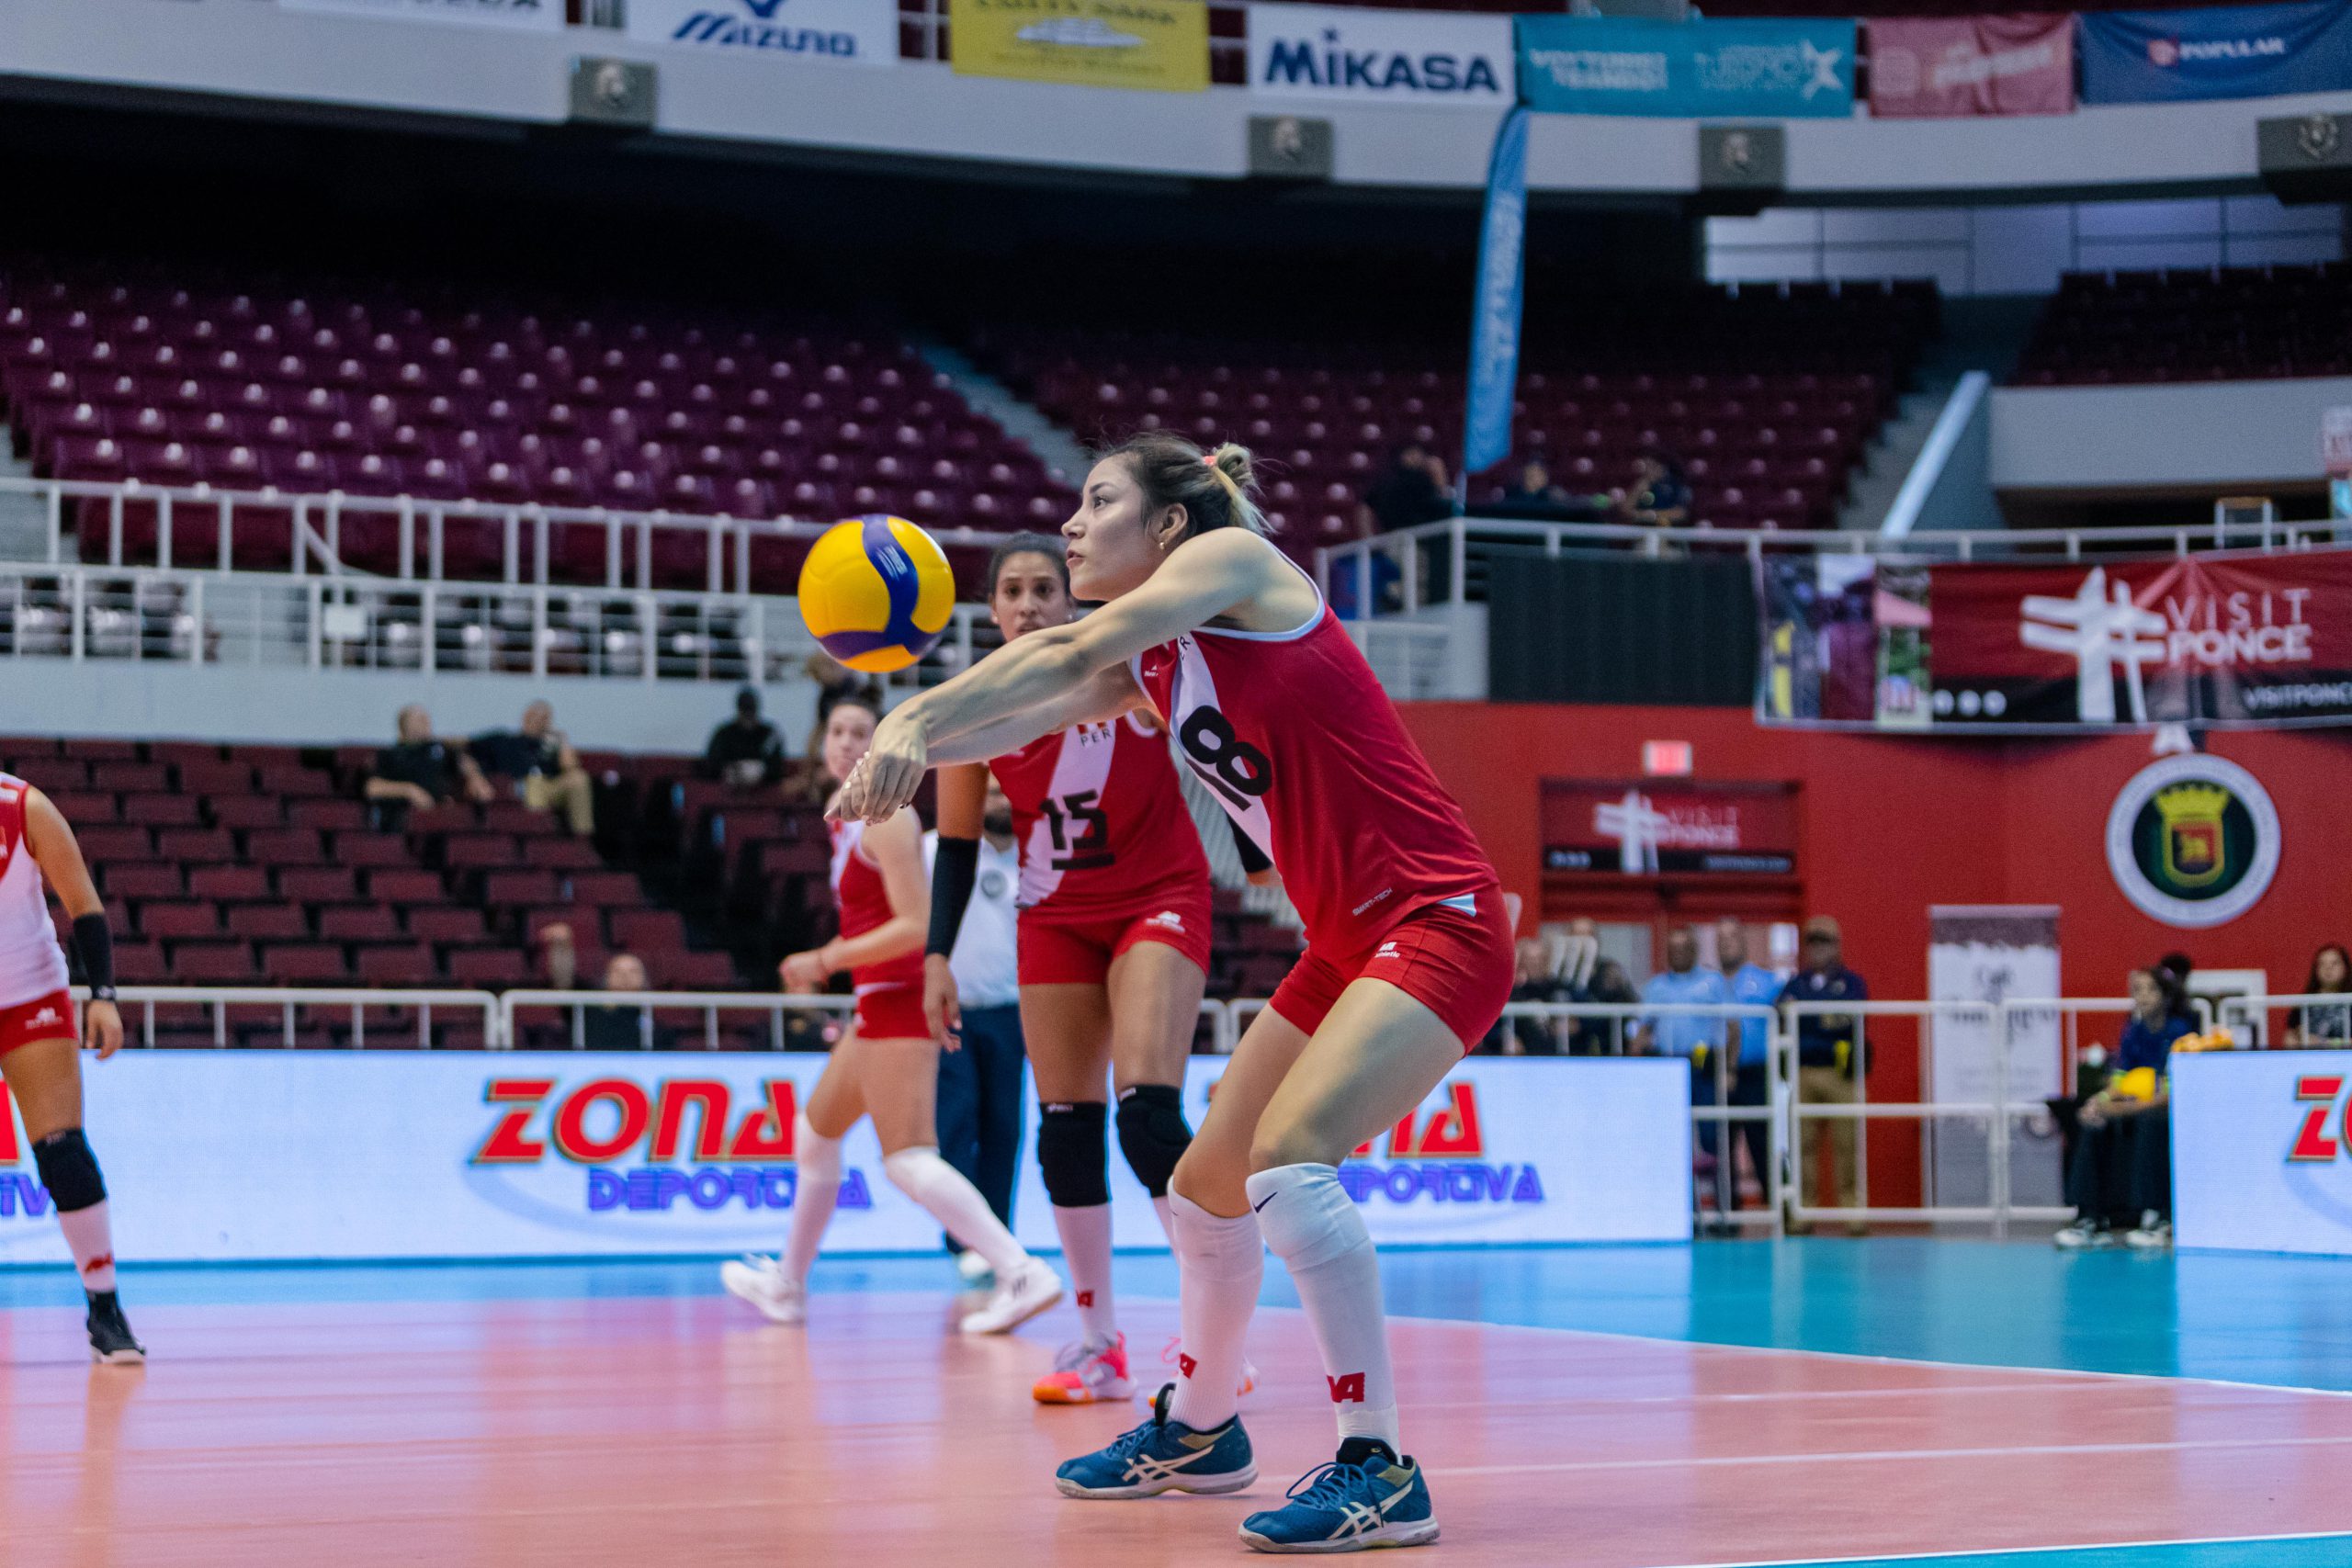 First victory for Peru in the Pan American Cup against Costa Rica 